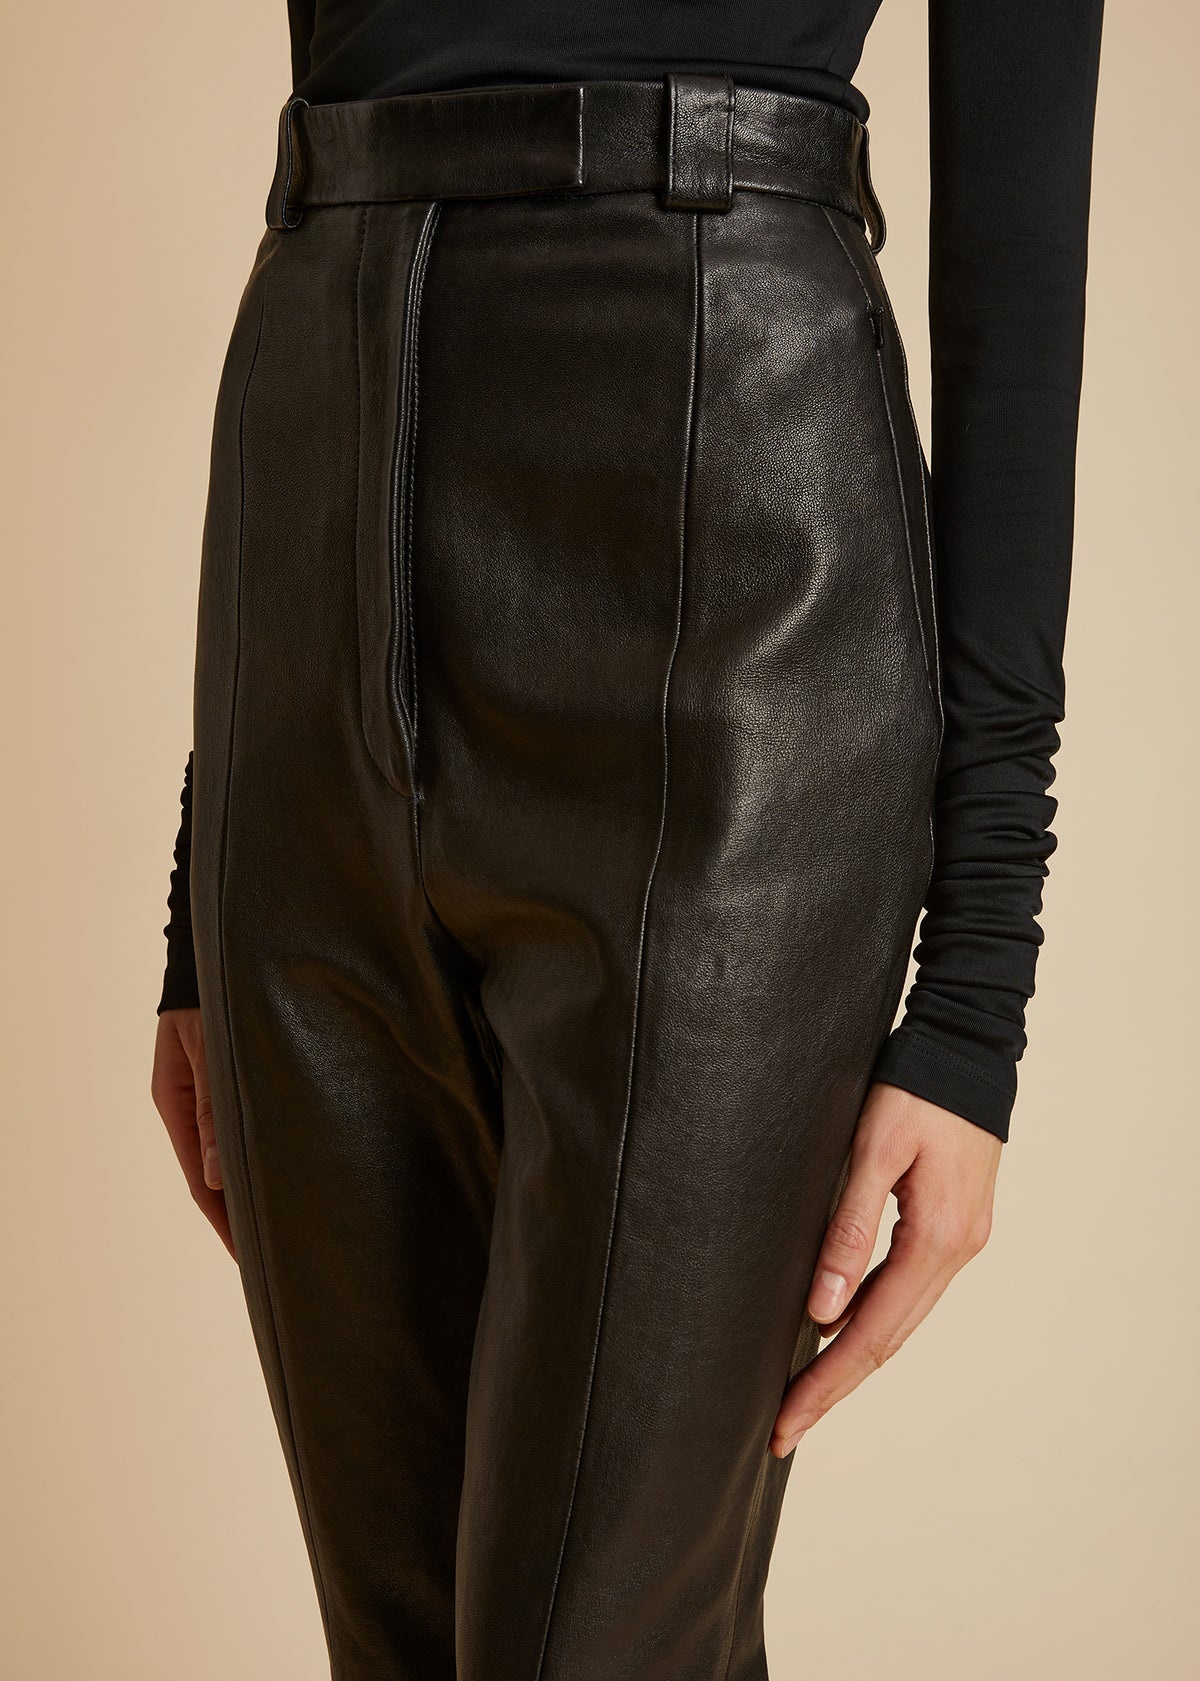 The Waylin Pant in Black Leather - 4